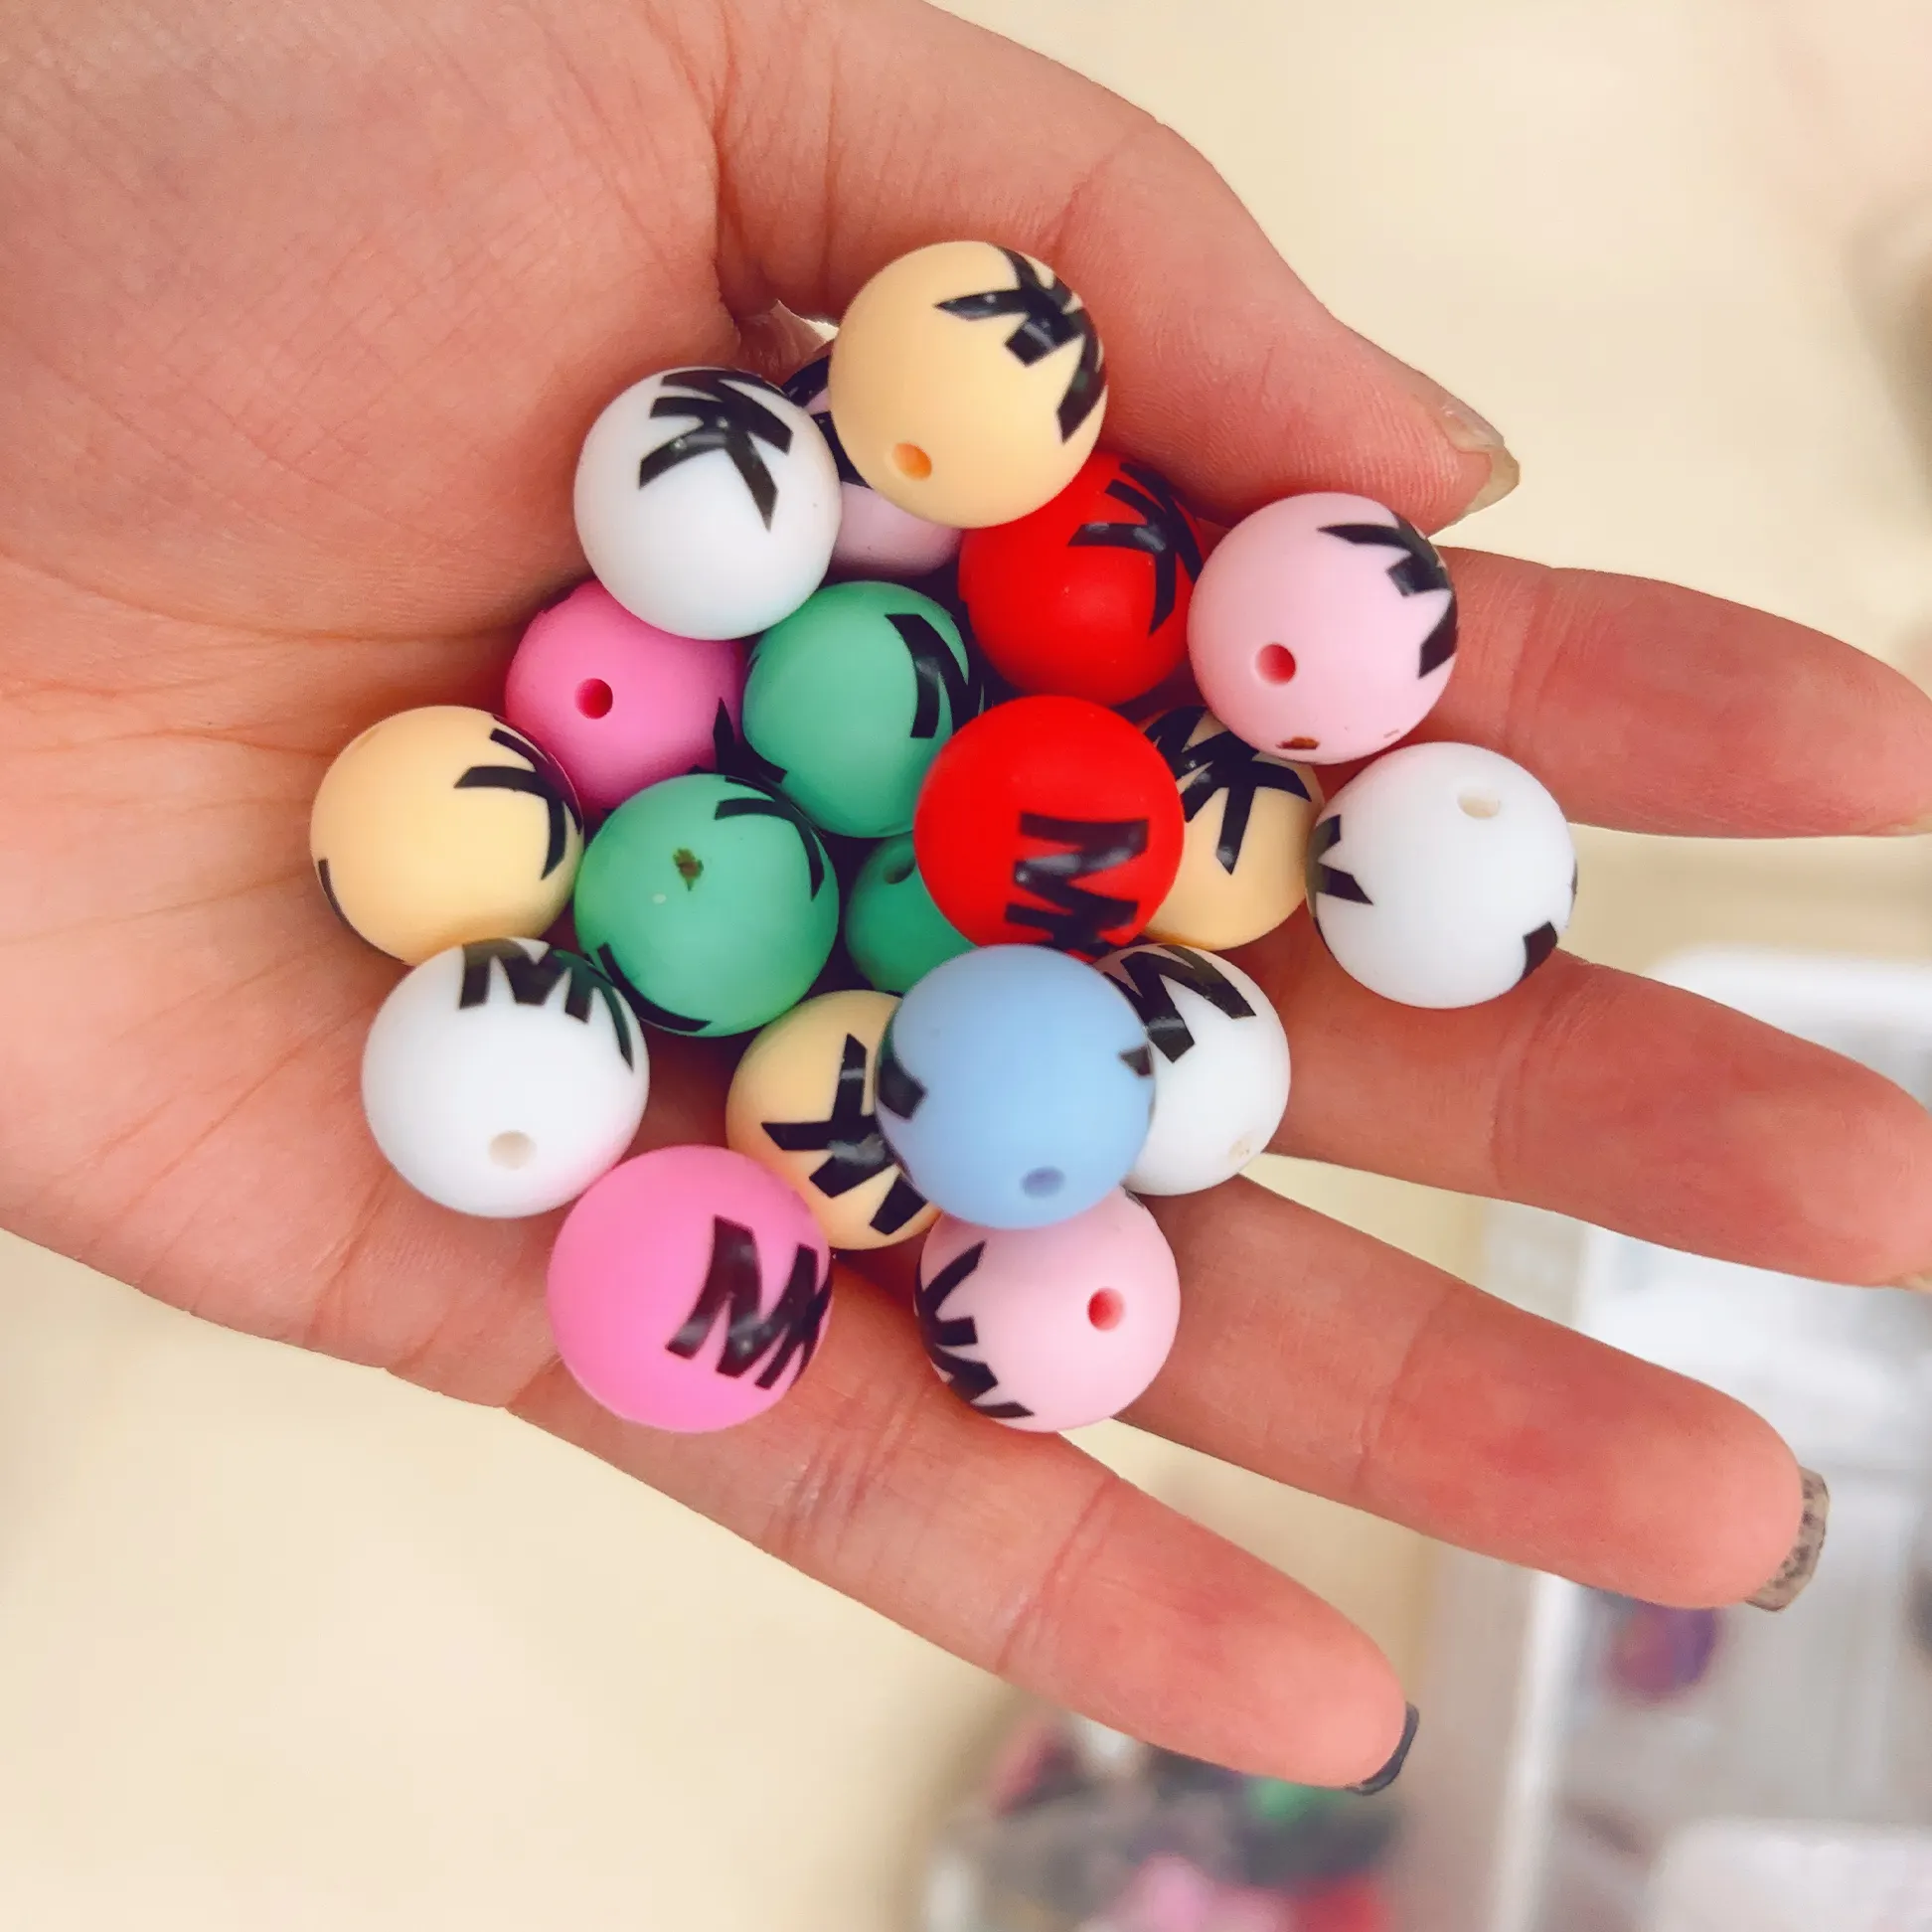 Fast Shipping Eco-friendly Designer Silicone Beads Chewable Hexagon Bead Baby Teething Toys and Pens for Jewelry Making